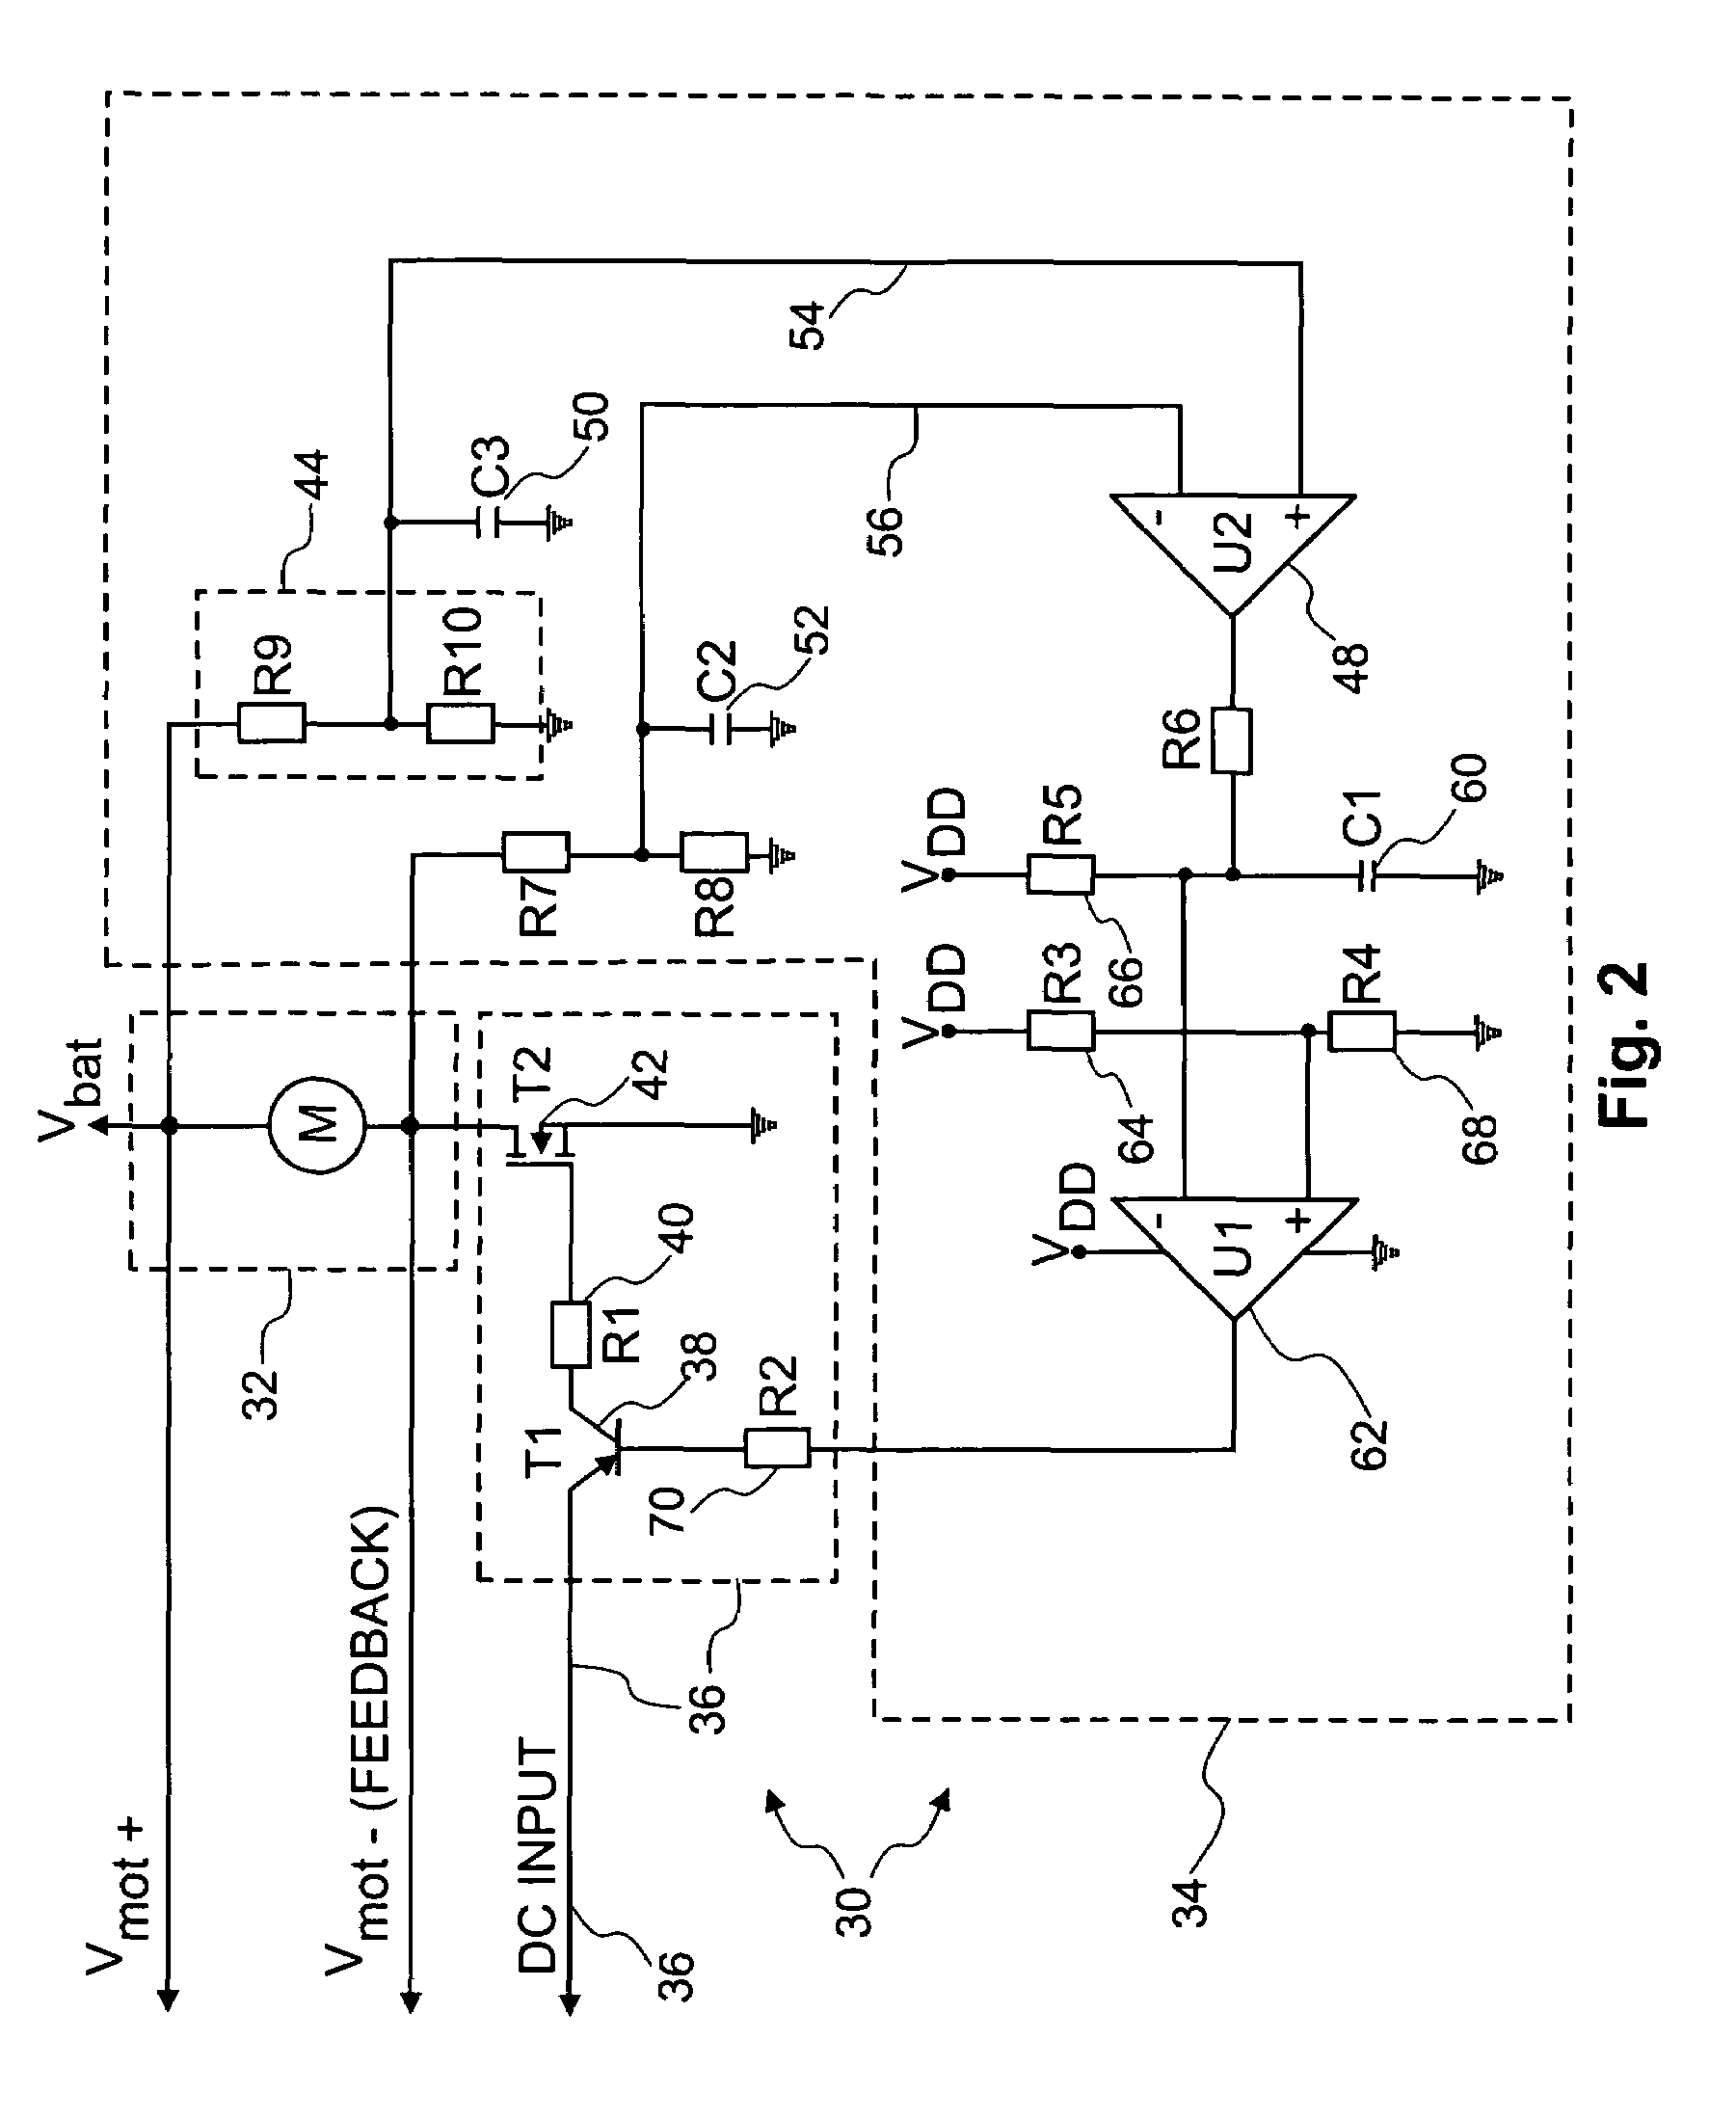 Auto-protected power modules and methods